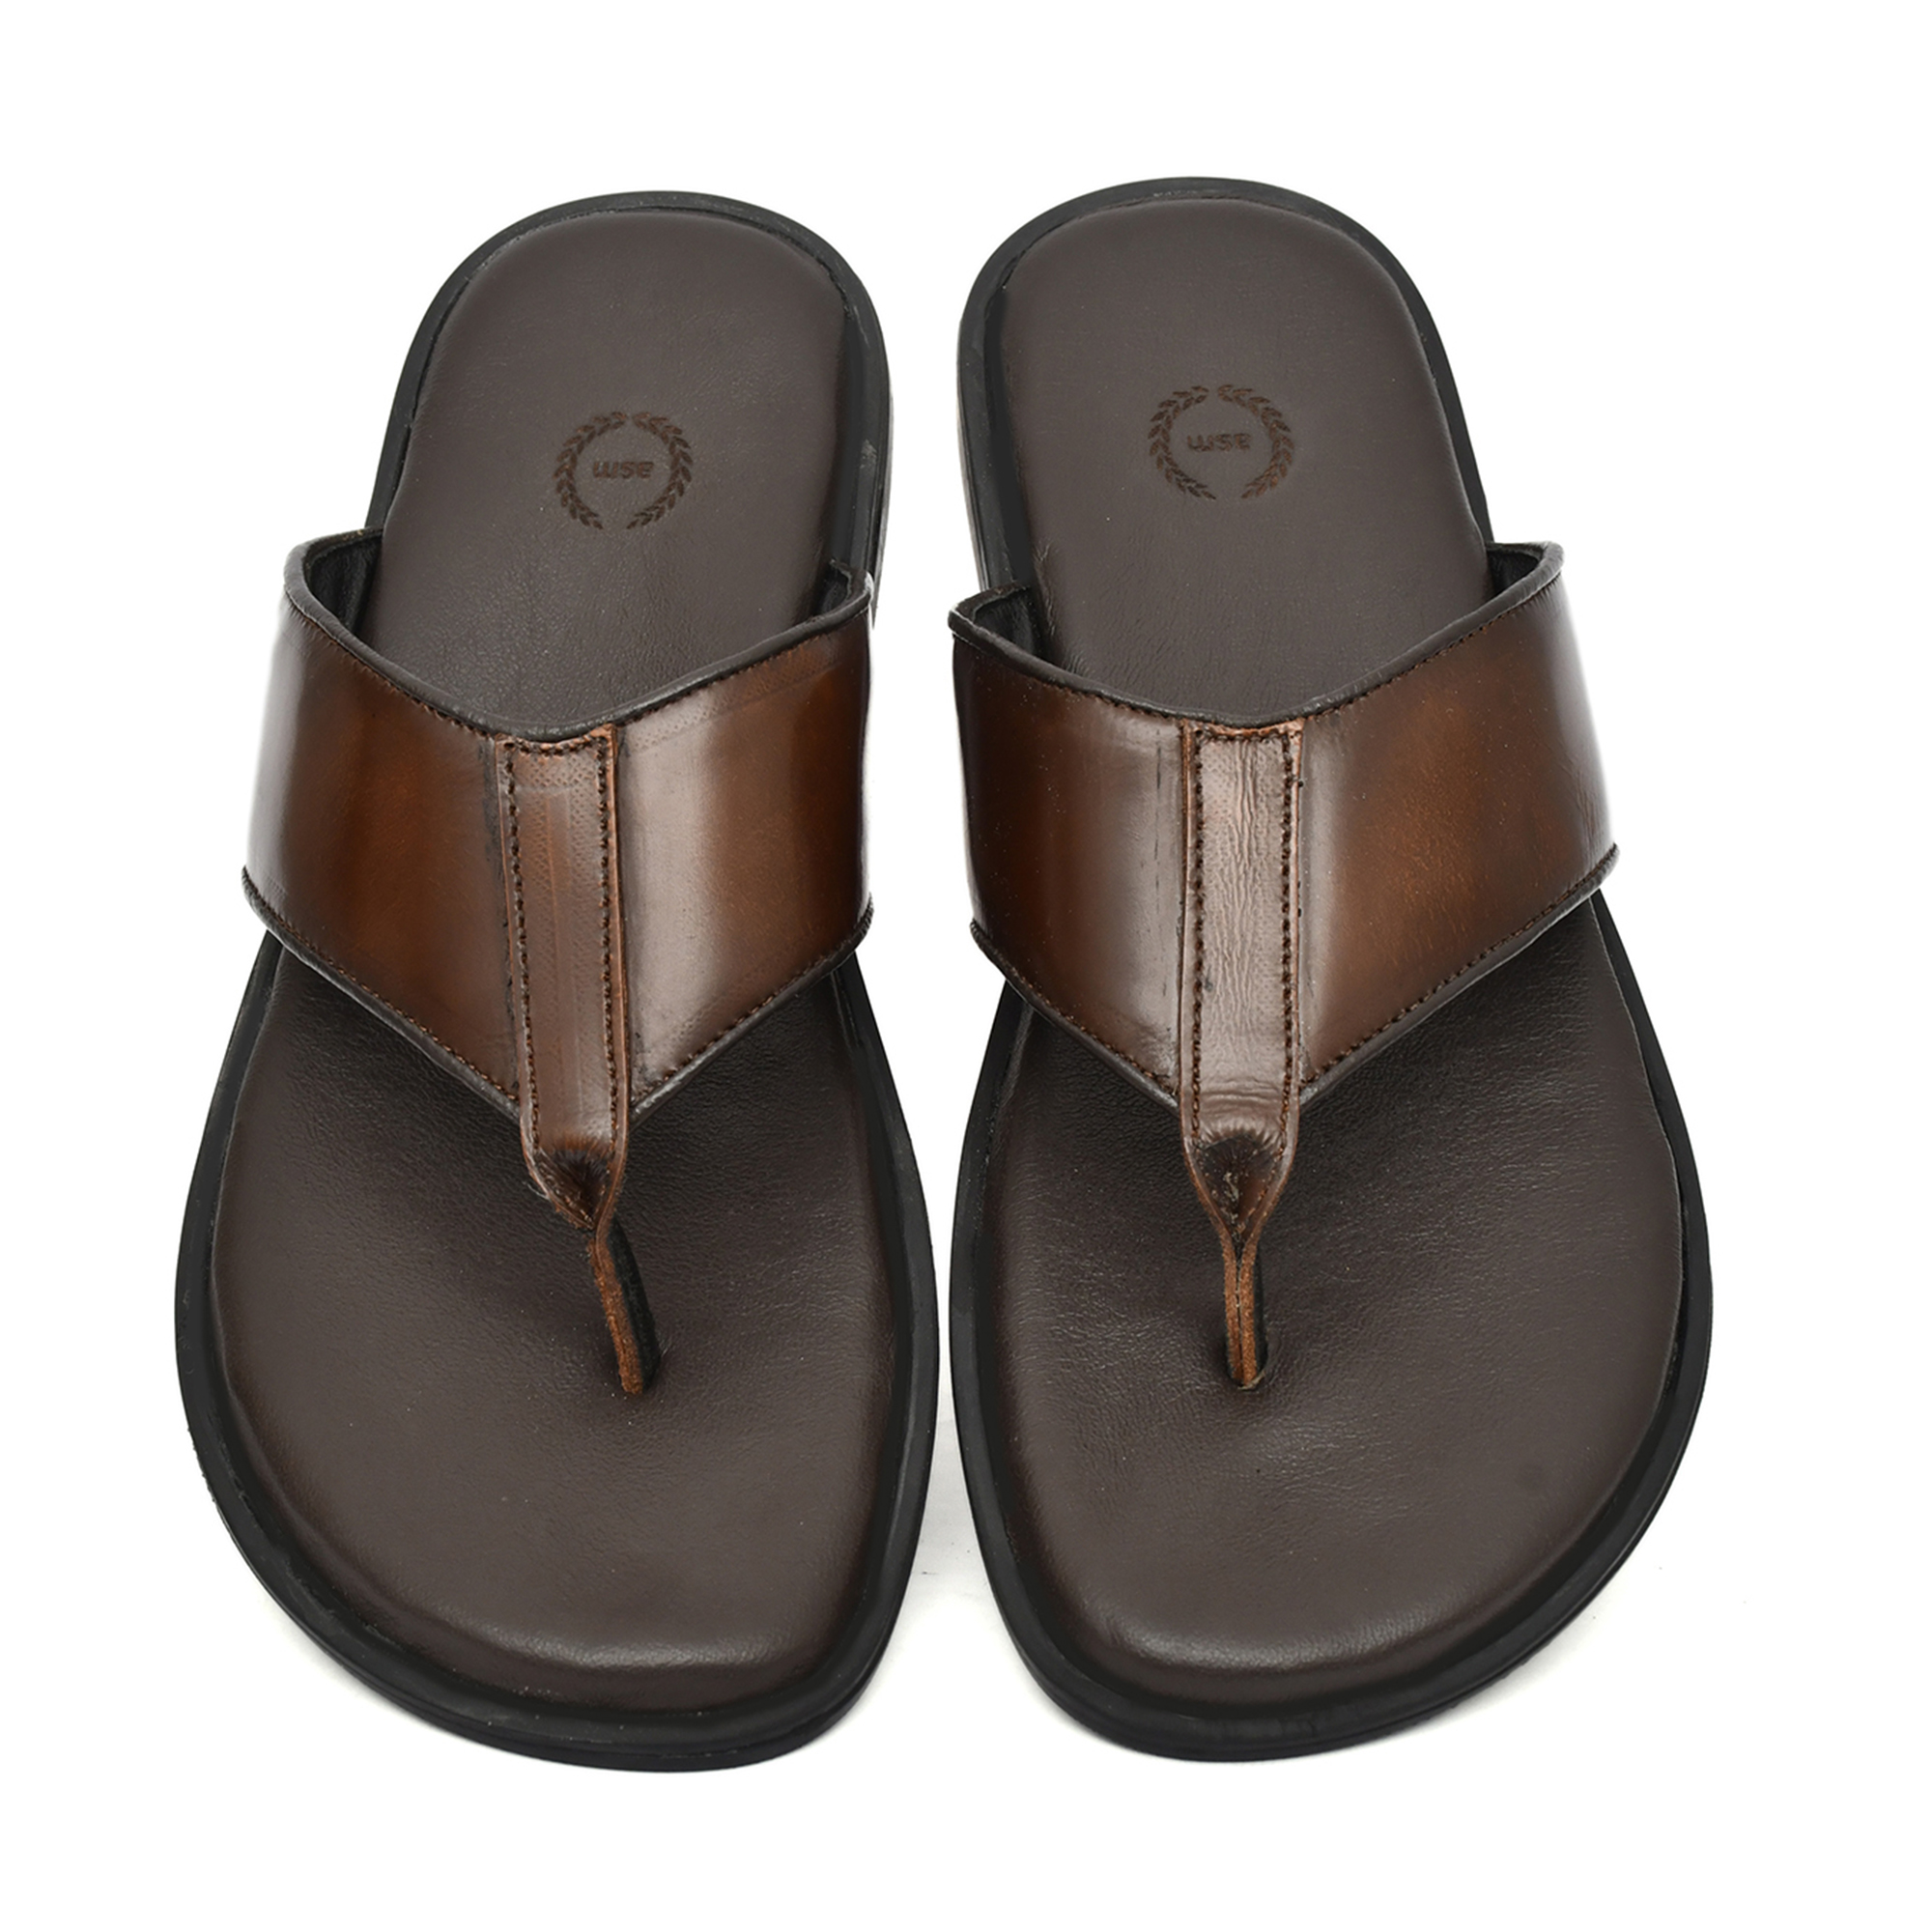 Tan Brushoff Leather Slippers for Men with Memory foam footpad by asm.